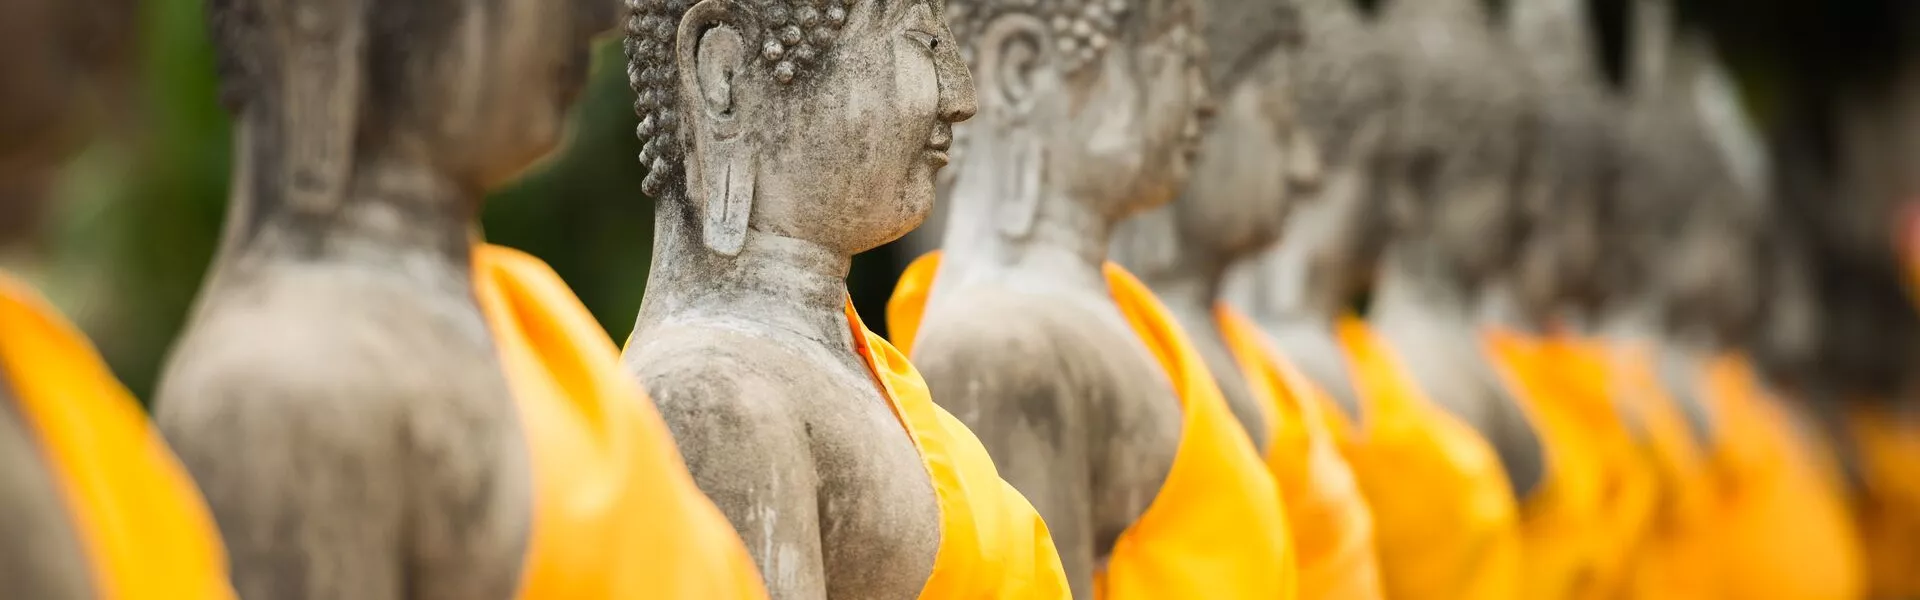 Old Buddha statues in temple in Ayutthaya, Thailand